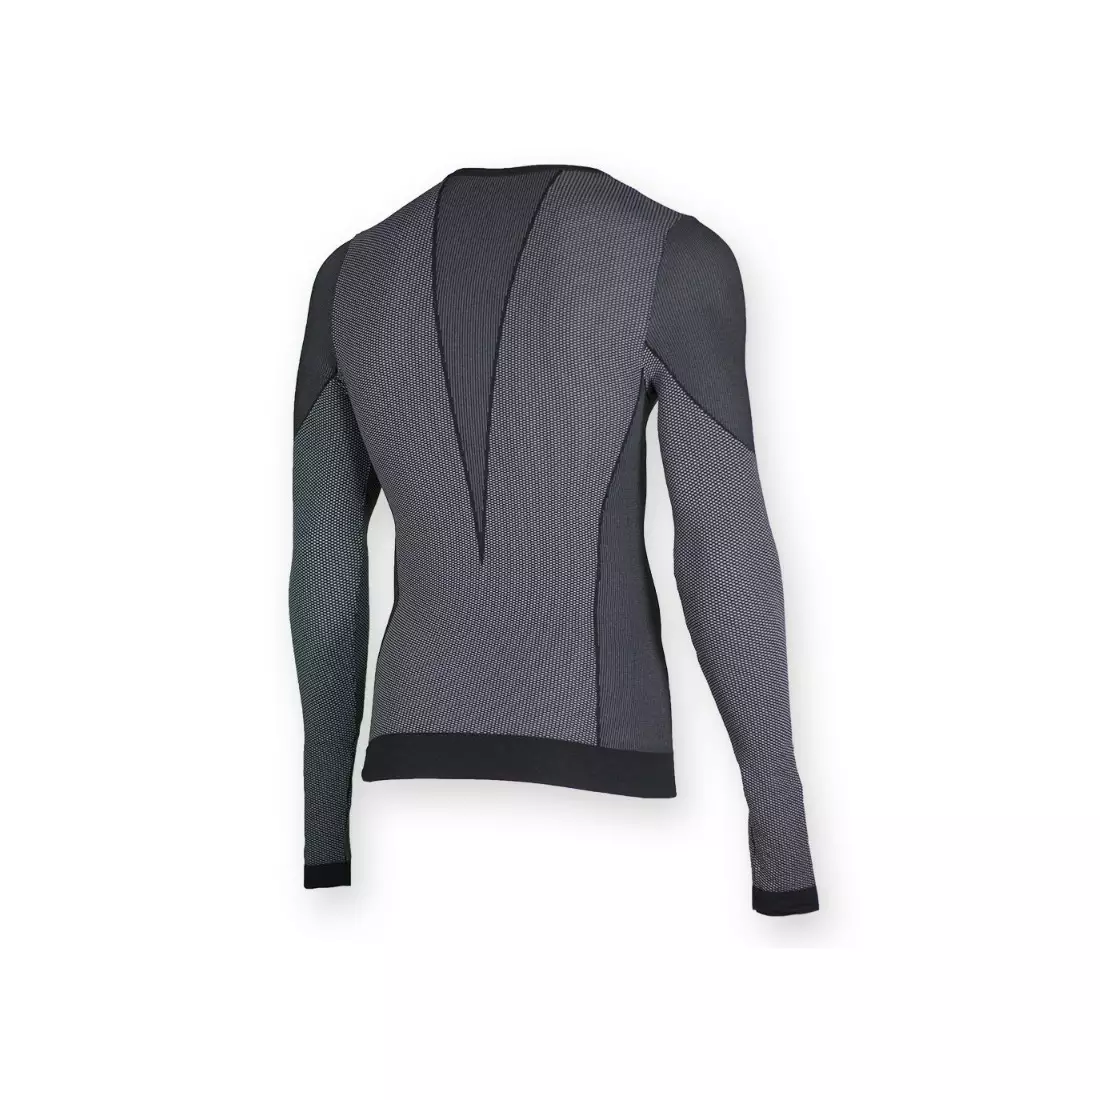 Rogelli CHASE men's underwear long-sleeved thermo-active t-shirt, black